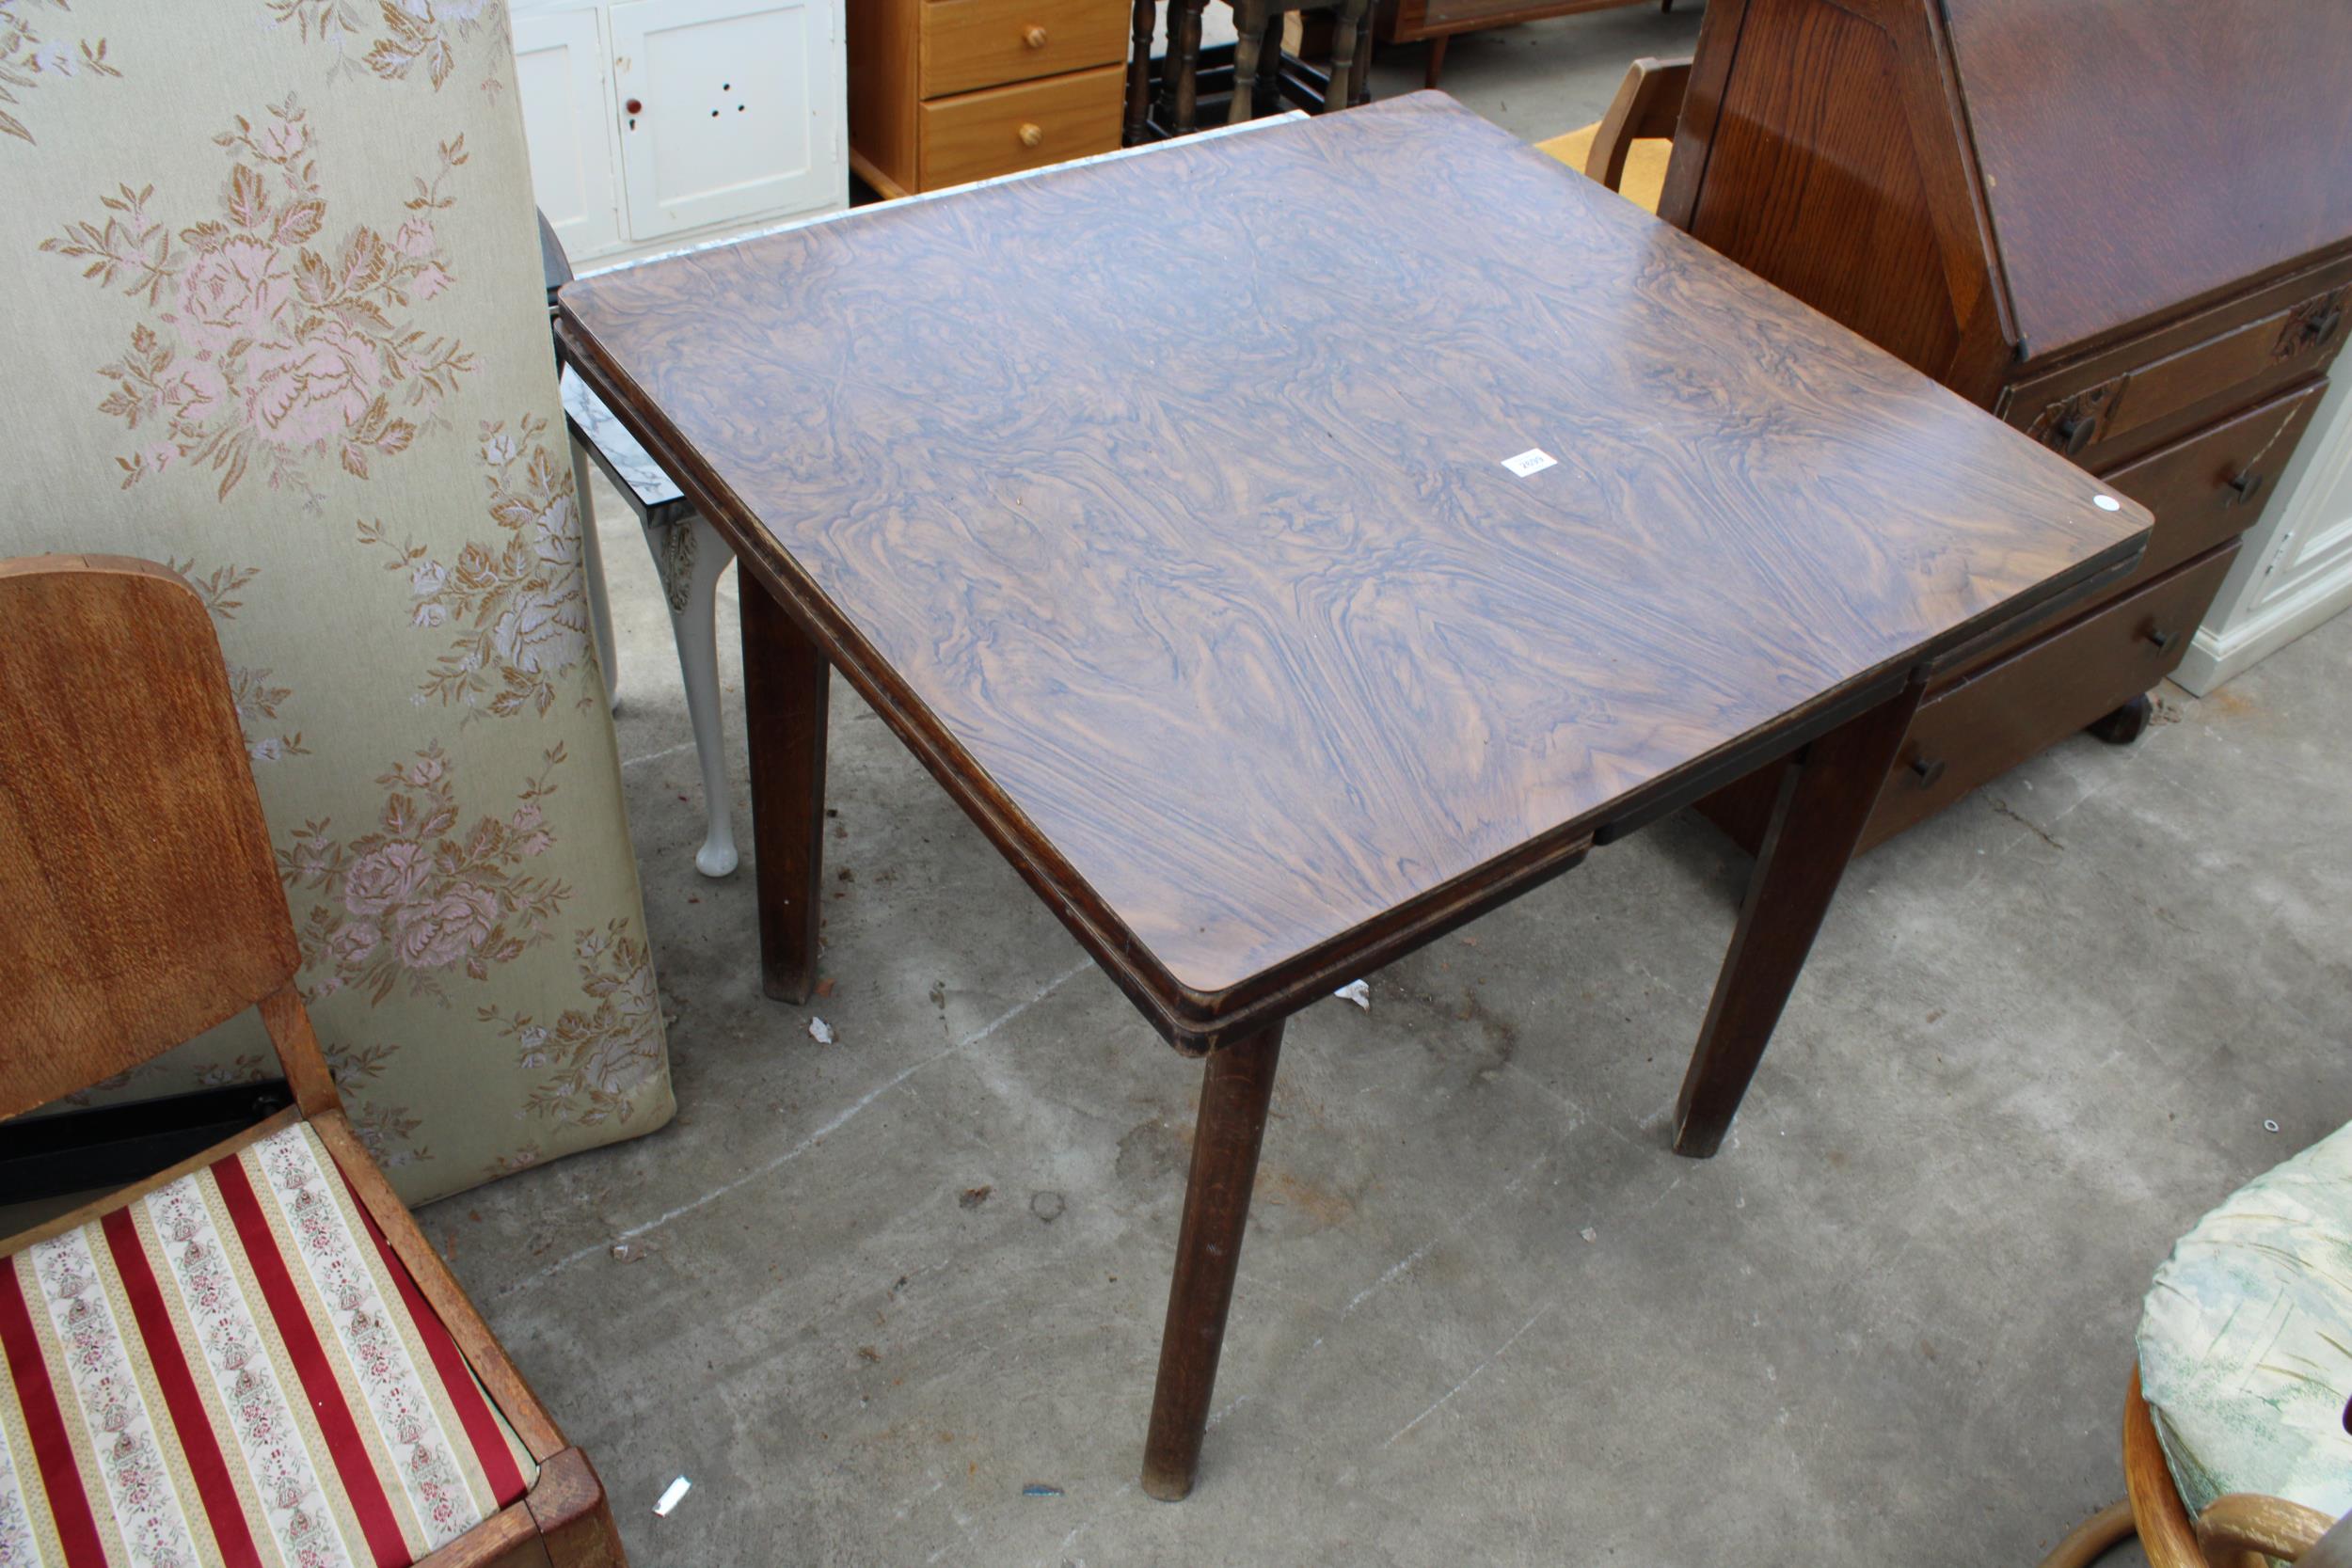 A MID 20TH CENTURY OAK DRAW-LEAF TABLE WITH FORMICA WALNUT TOP